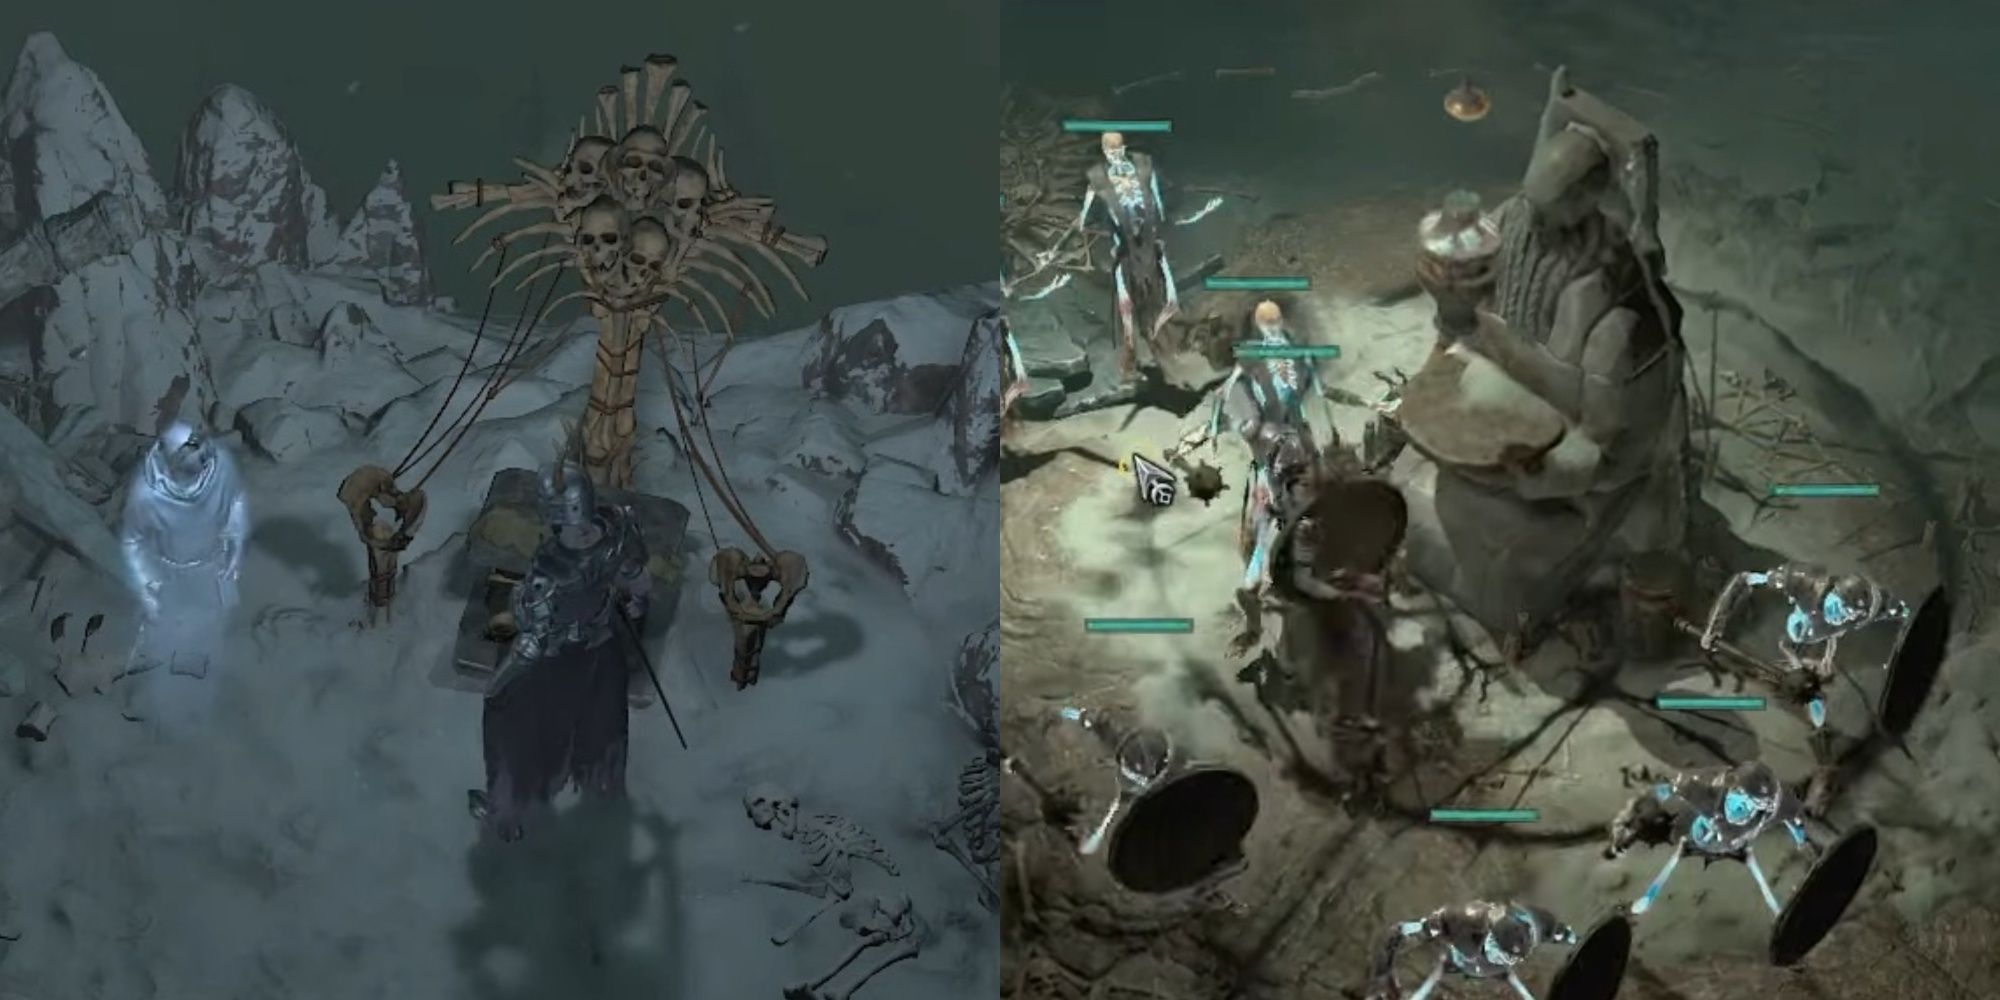 The two shrines players will interact with during the Necromancer Quest Call of the Underworld in Diablo 4